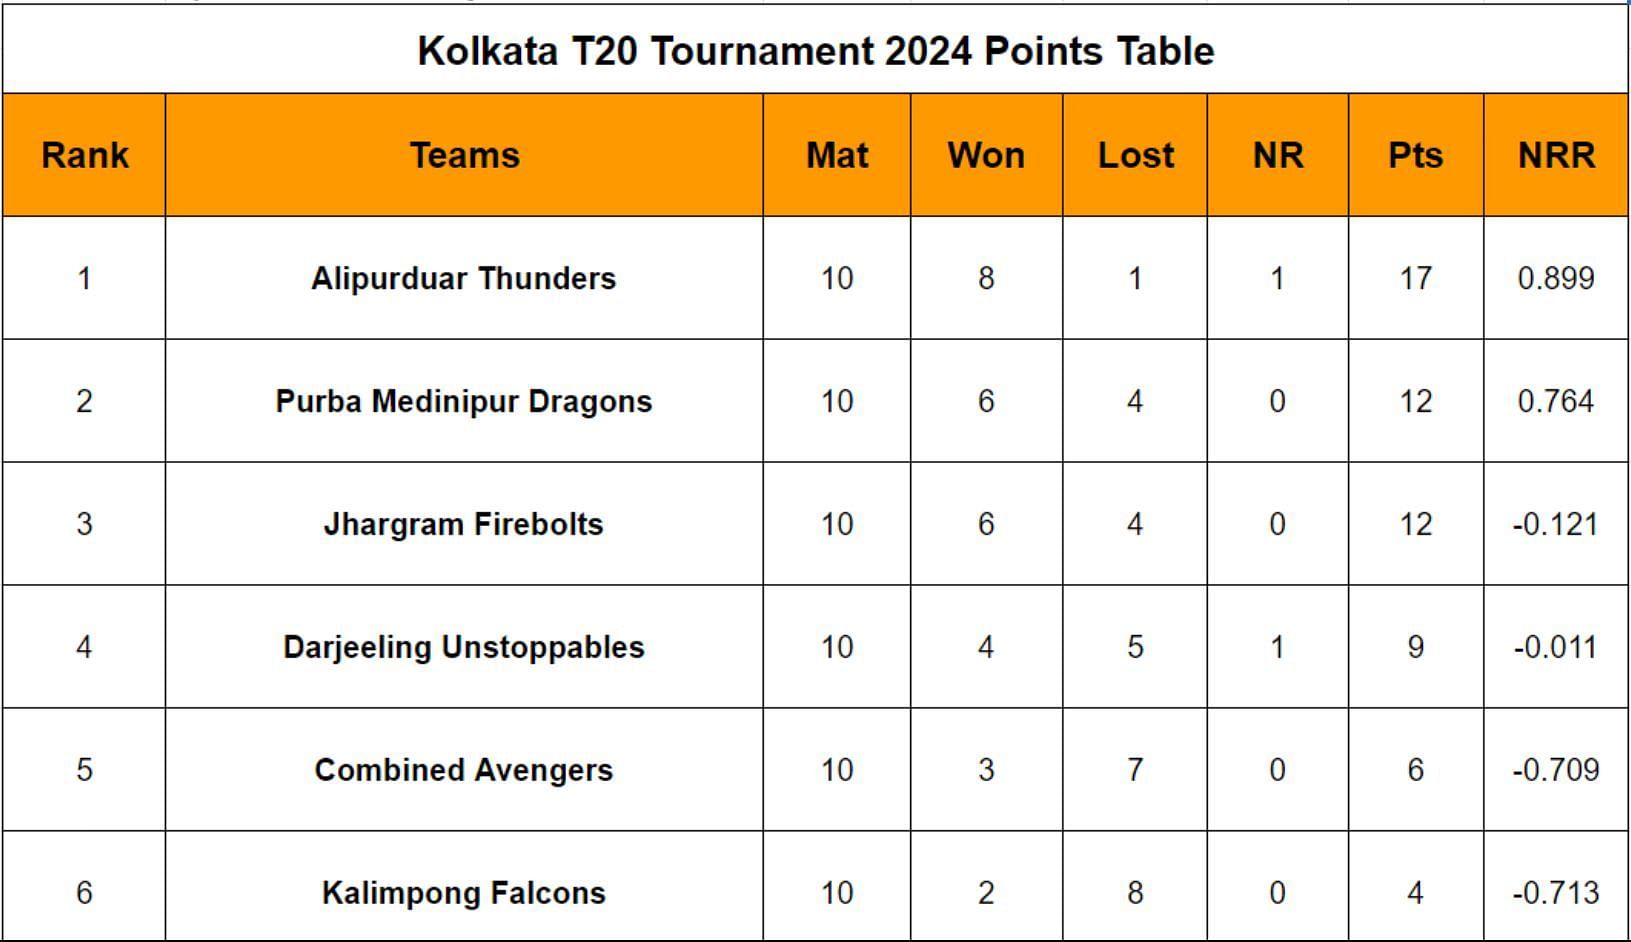 Kolkata T20 Tournament 2024 Points Table Updated standings after